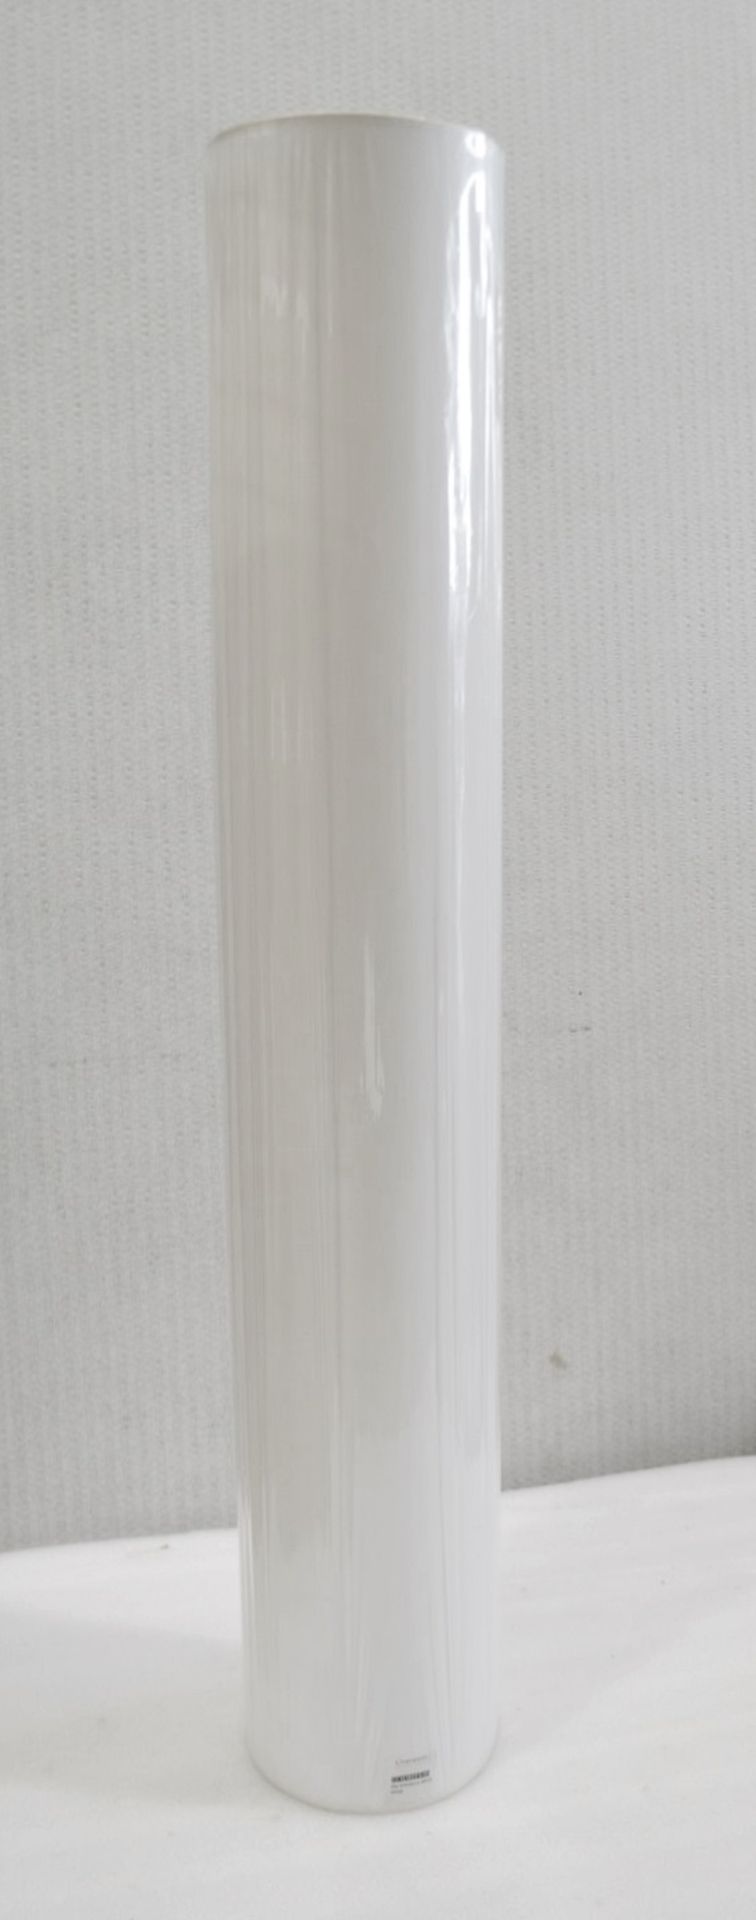 1 x CHELSOM Commercial Large 1.2 Metre Tall Light Shade. - Unused Boxed Stock - Ref: CHL159 -